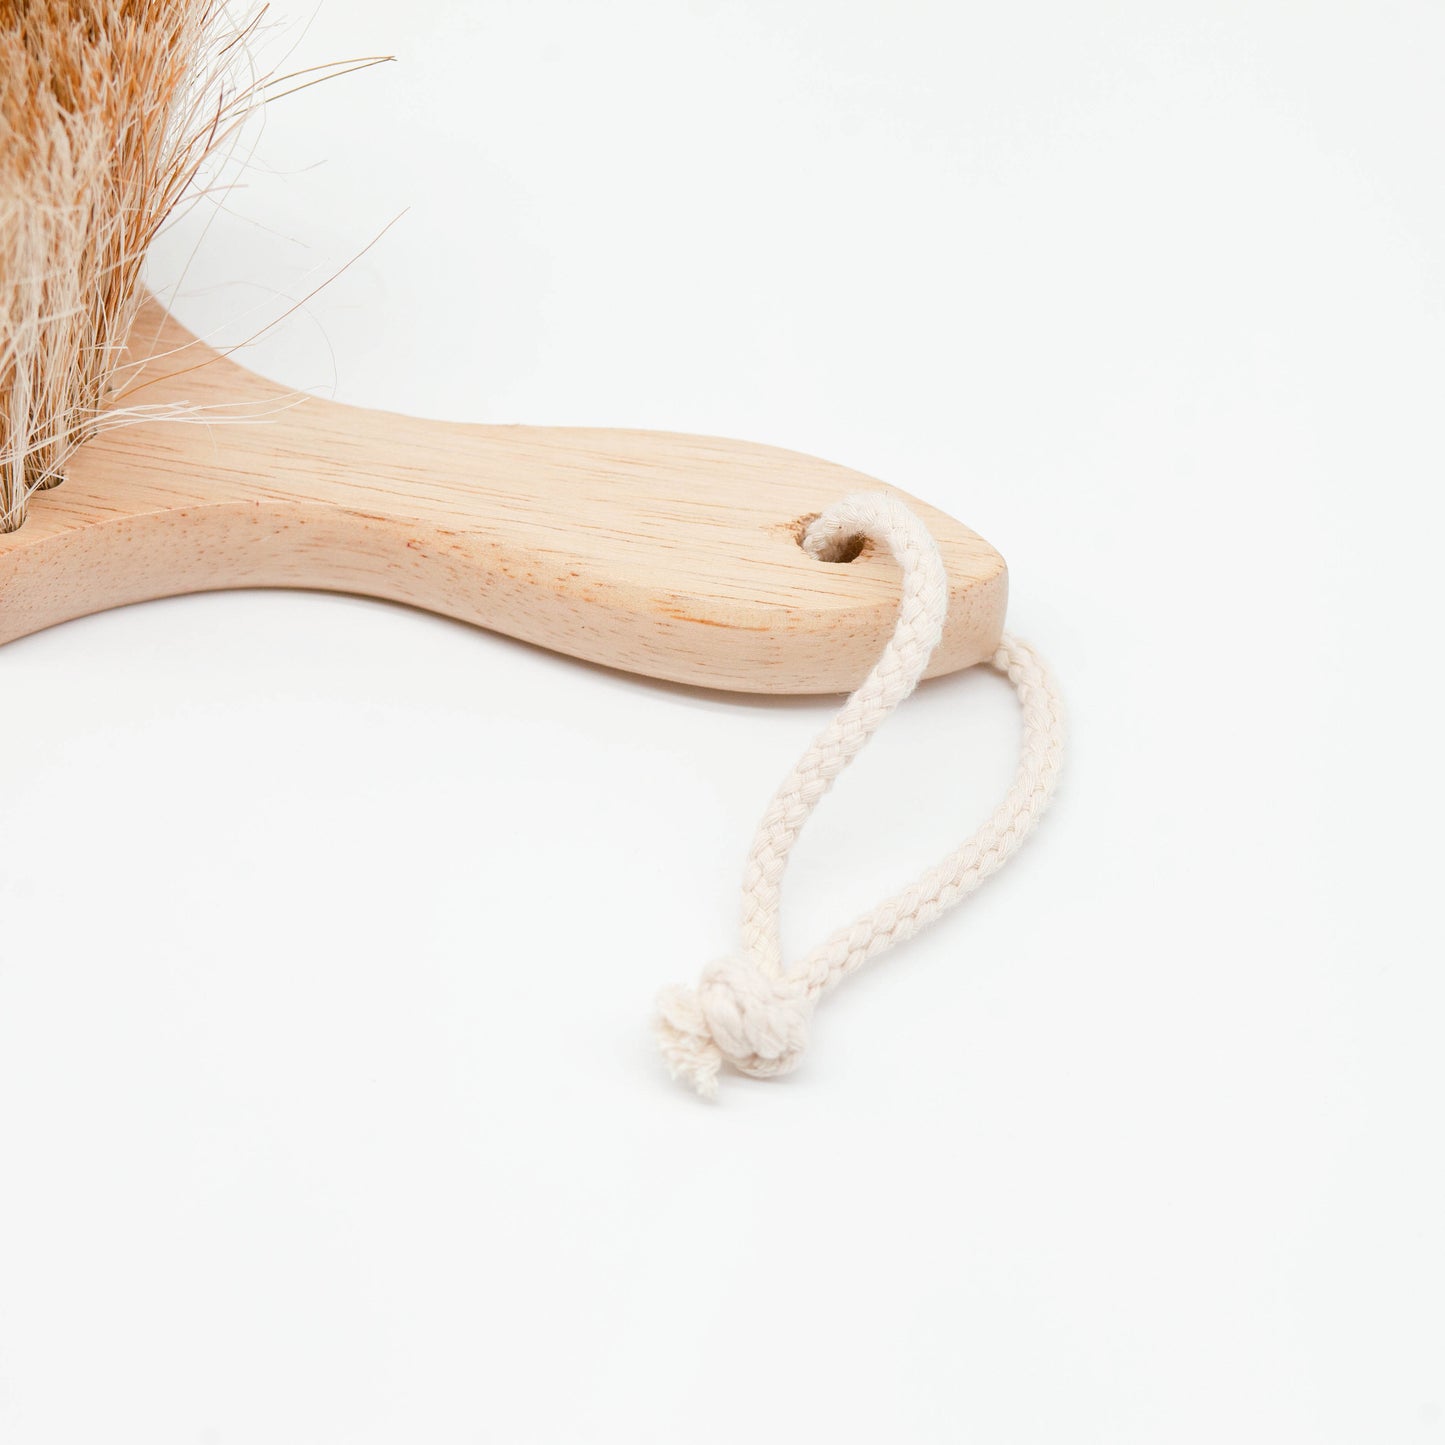 Sande Kids™ Sand Brush is made from rubberwood with coconut and jute fibres - all sourced sustainably. Sweep sand from kids, adults, toys, boards, pets and car carpet